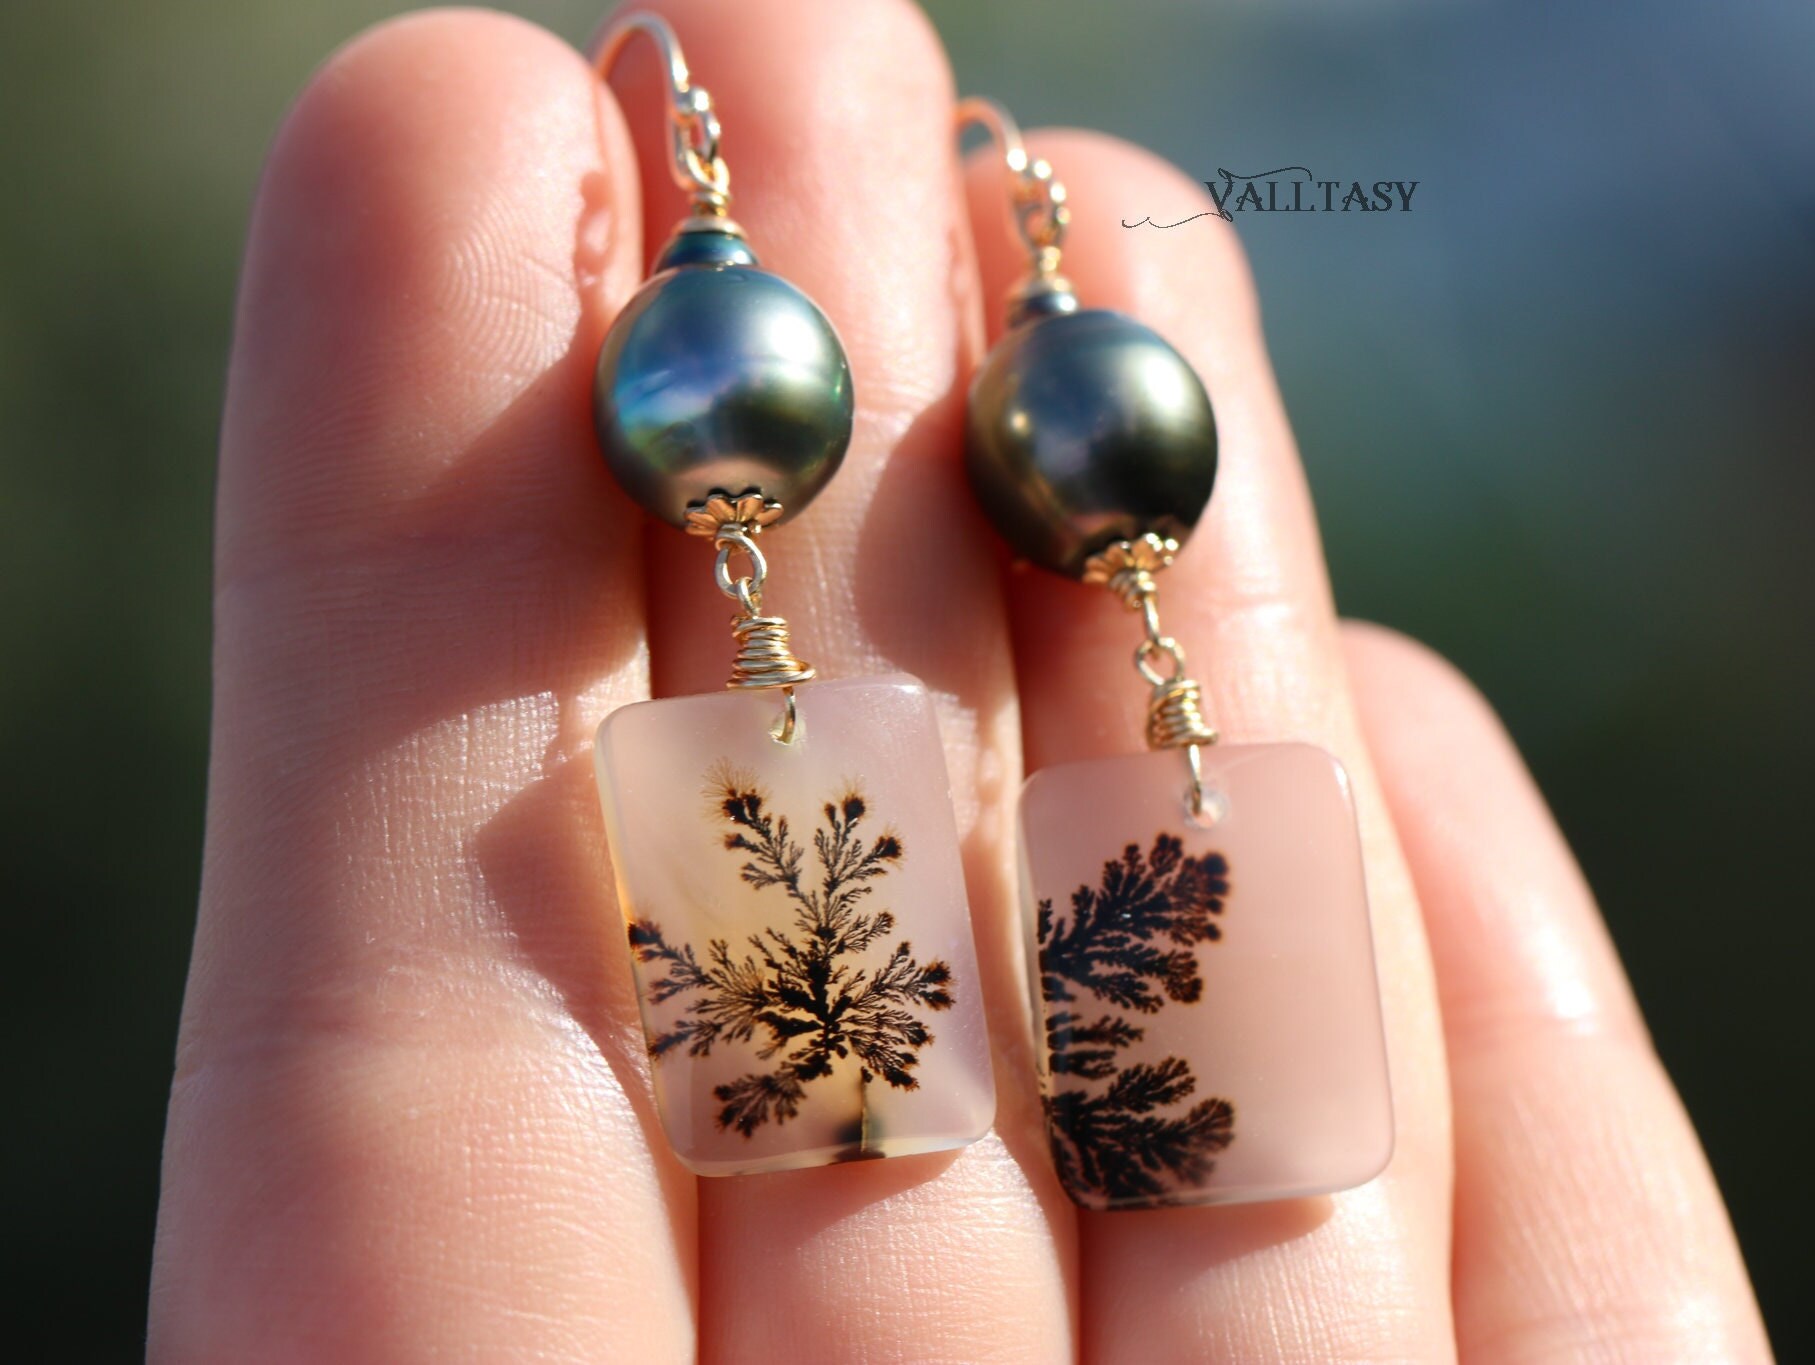 Solid Gold 14K Dendritic Agate and Tahitian Pearls Earrings, One of a Kind